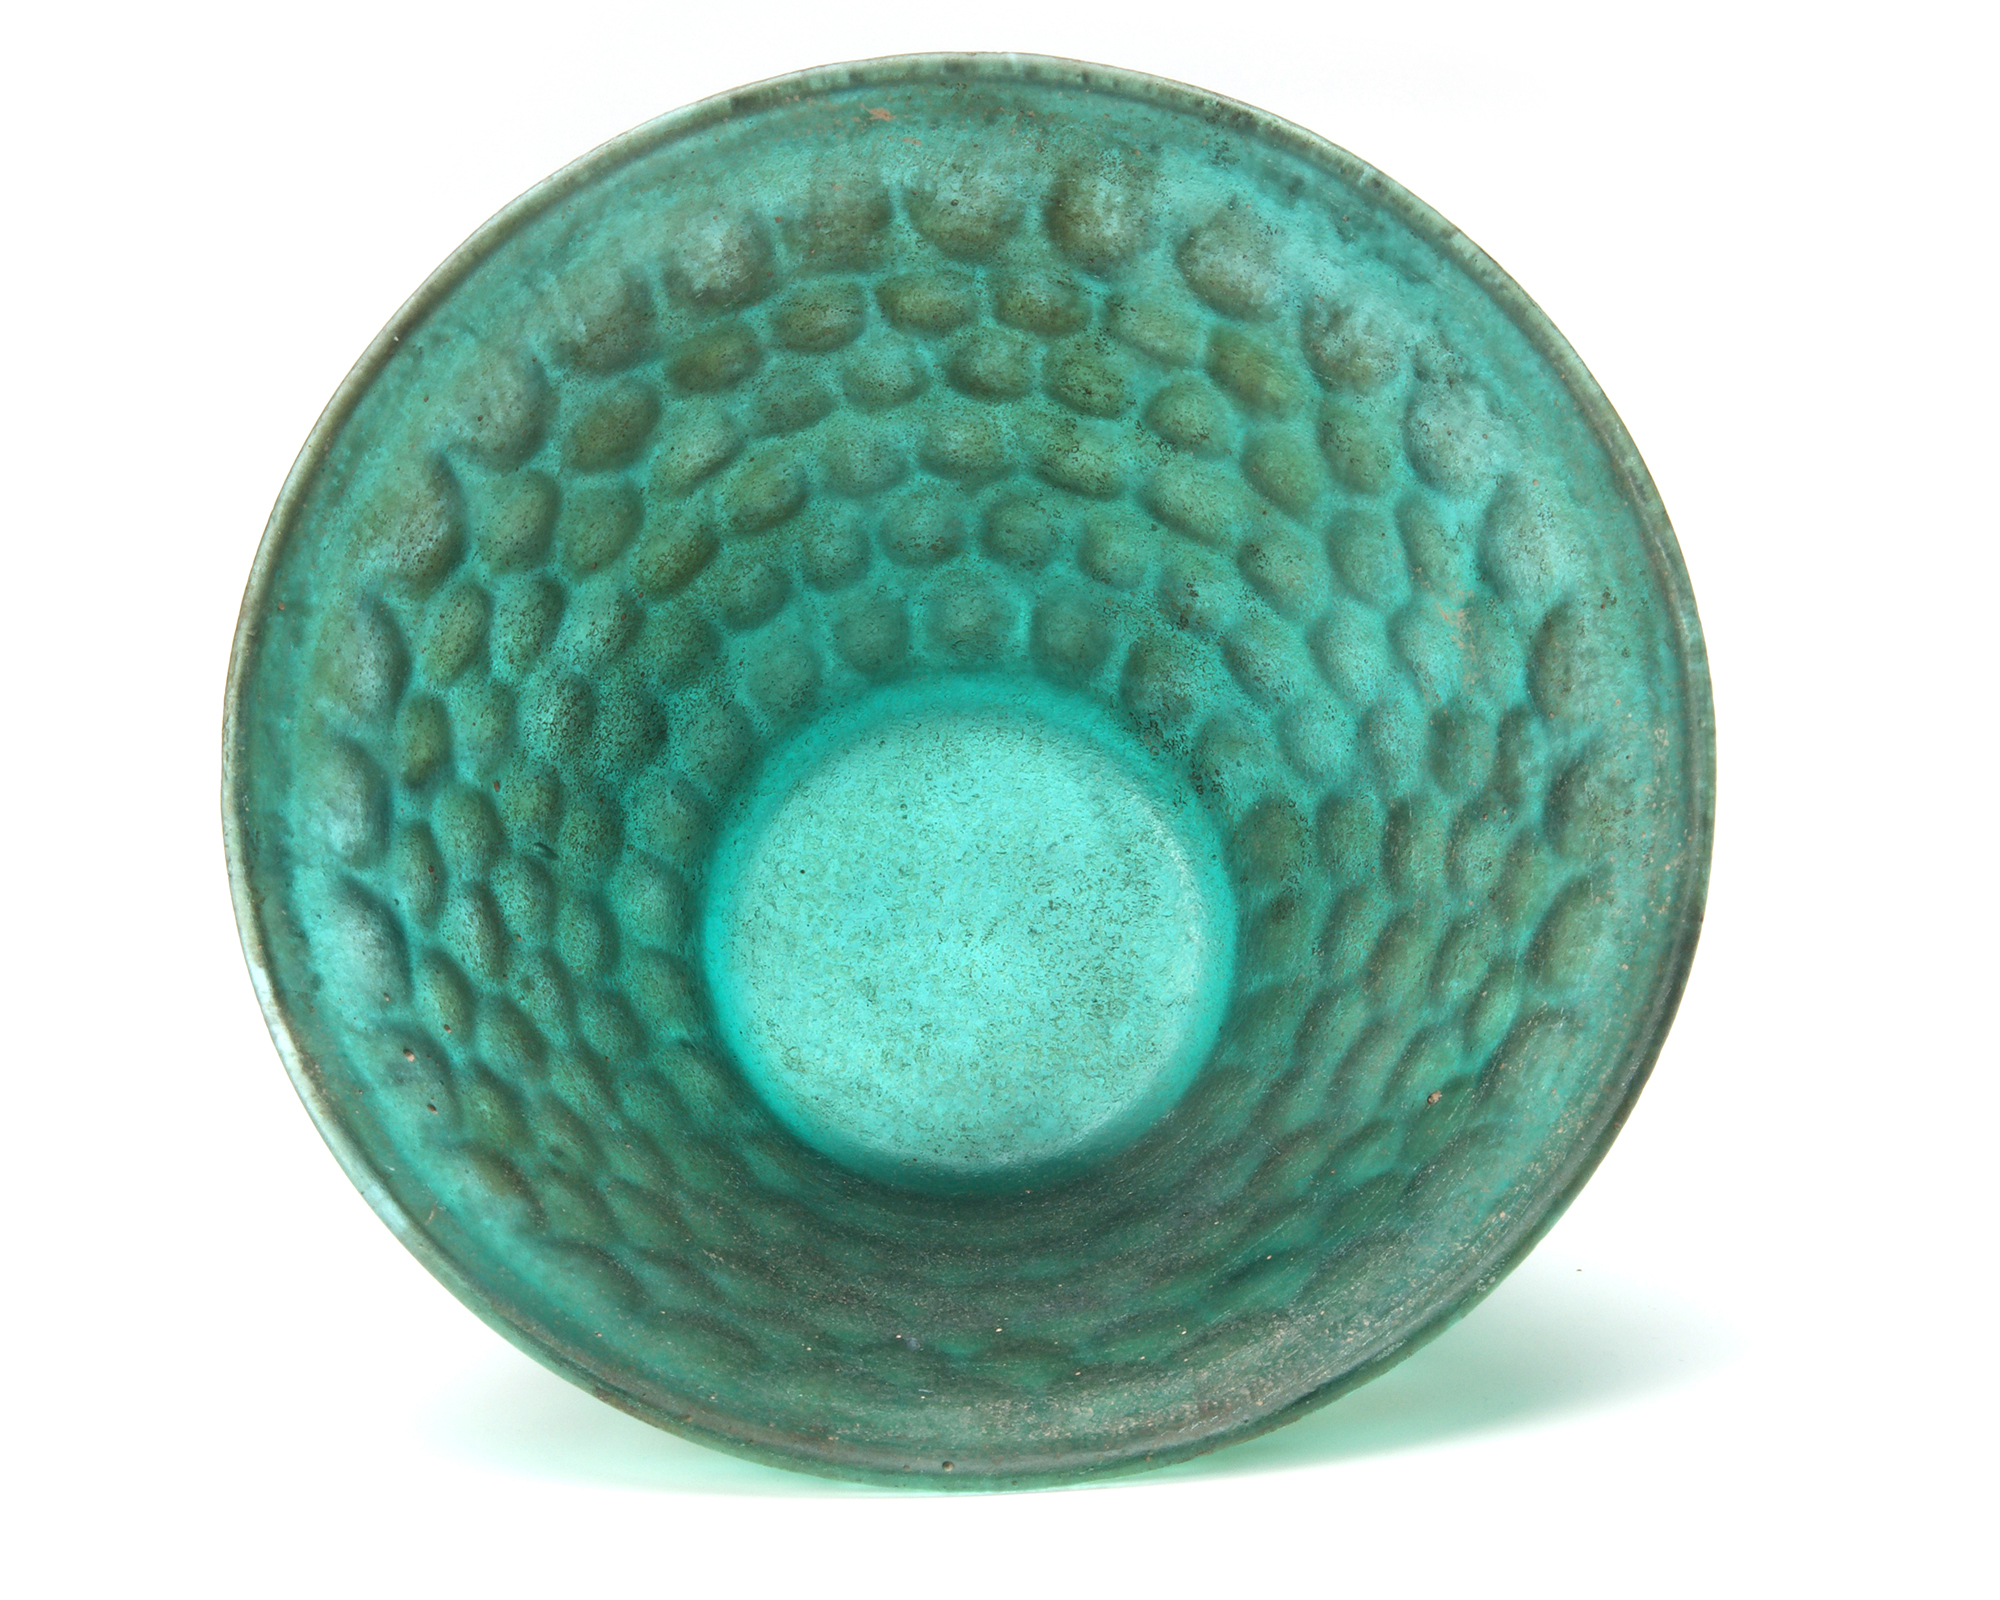 A PERSIAN GREEN CUT GLASS BOWL, 8TH-9TH CENTURY - Image 9 of 10